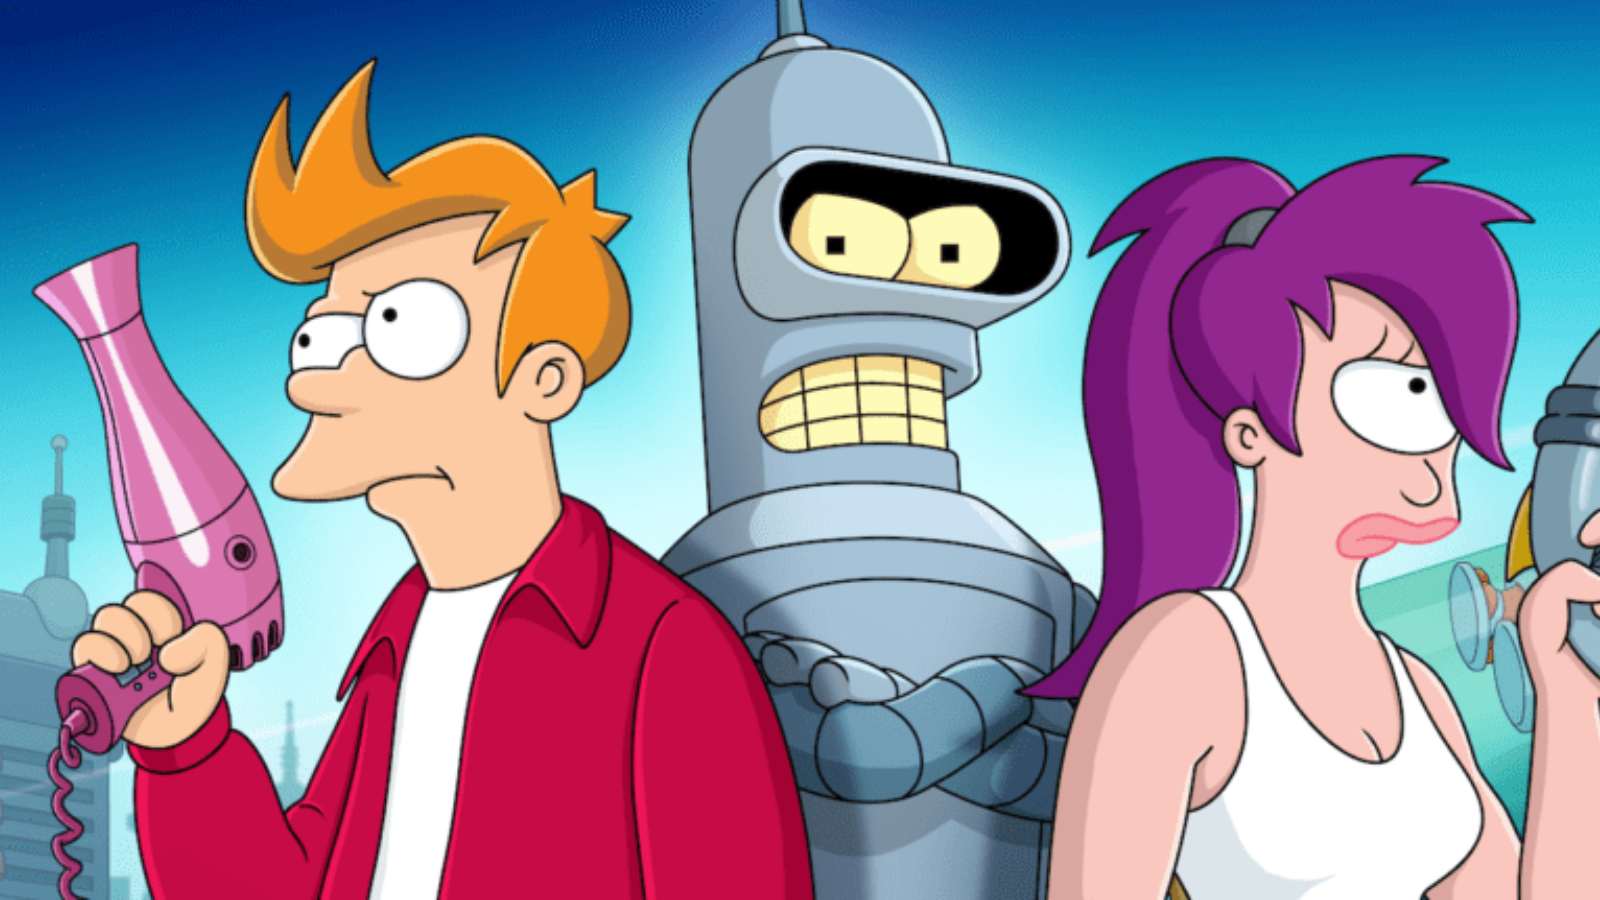 Futurama Season 11 Episode 8: Release Date, Time, Where to Watch, and Episodes